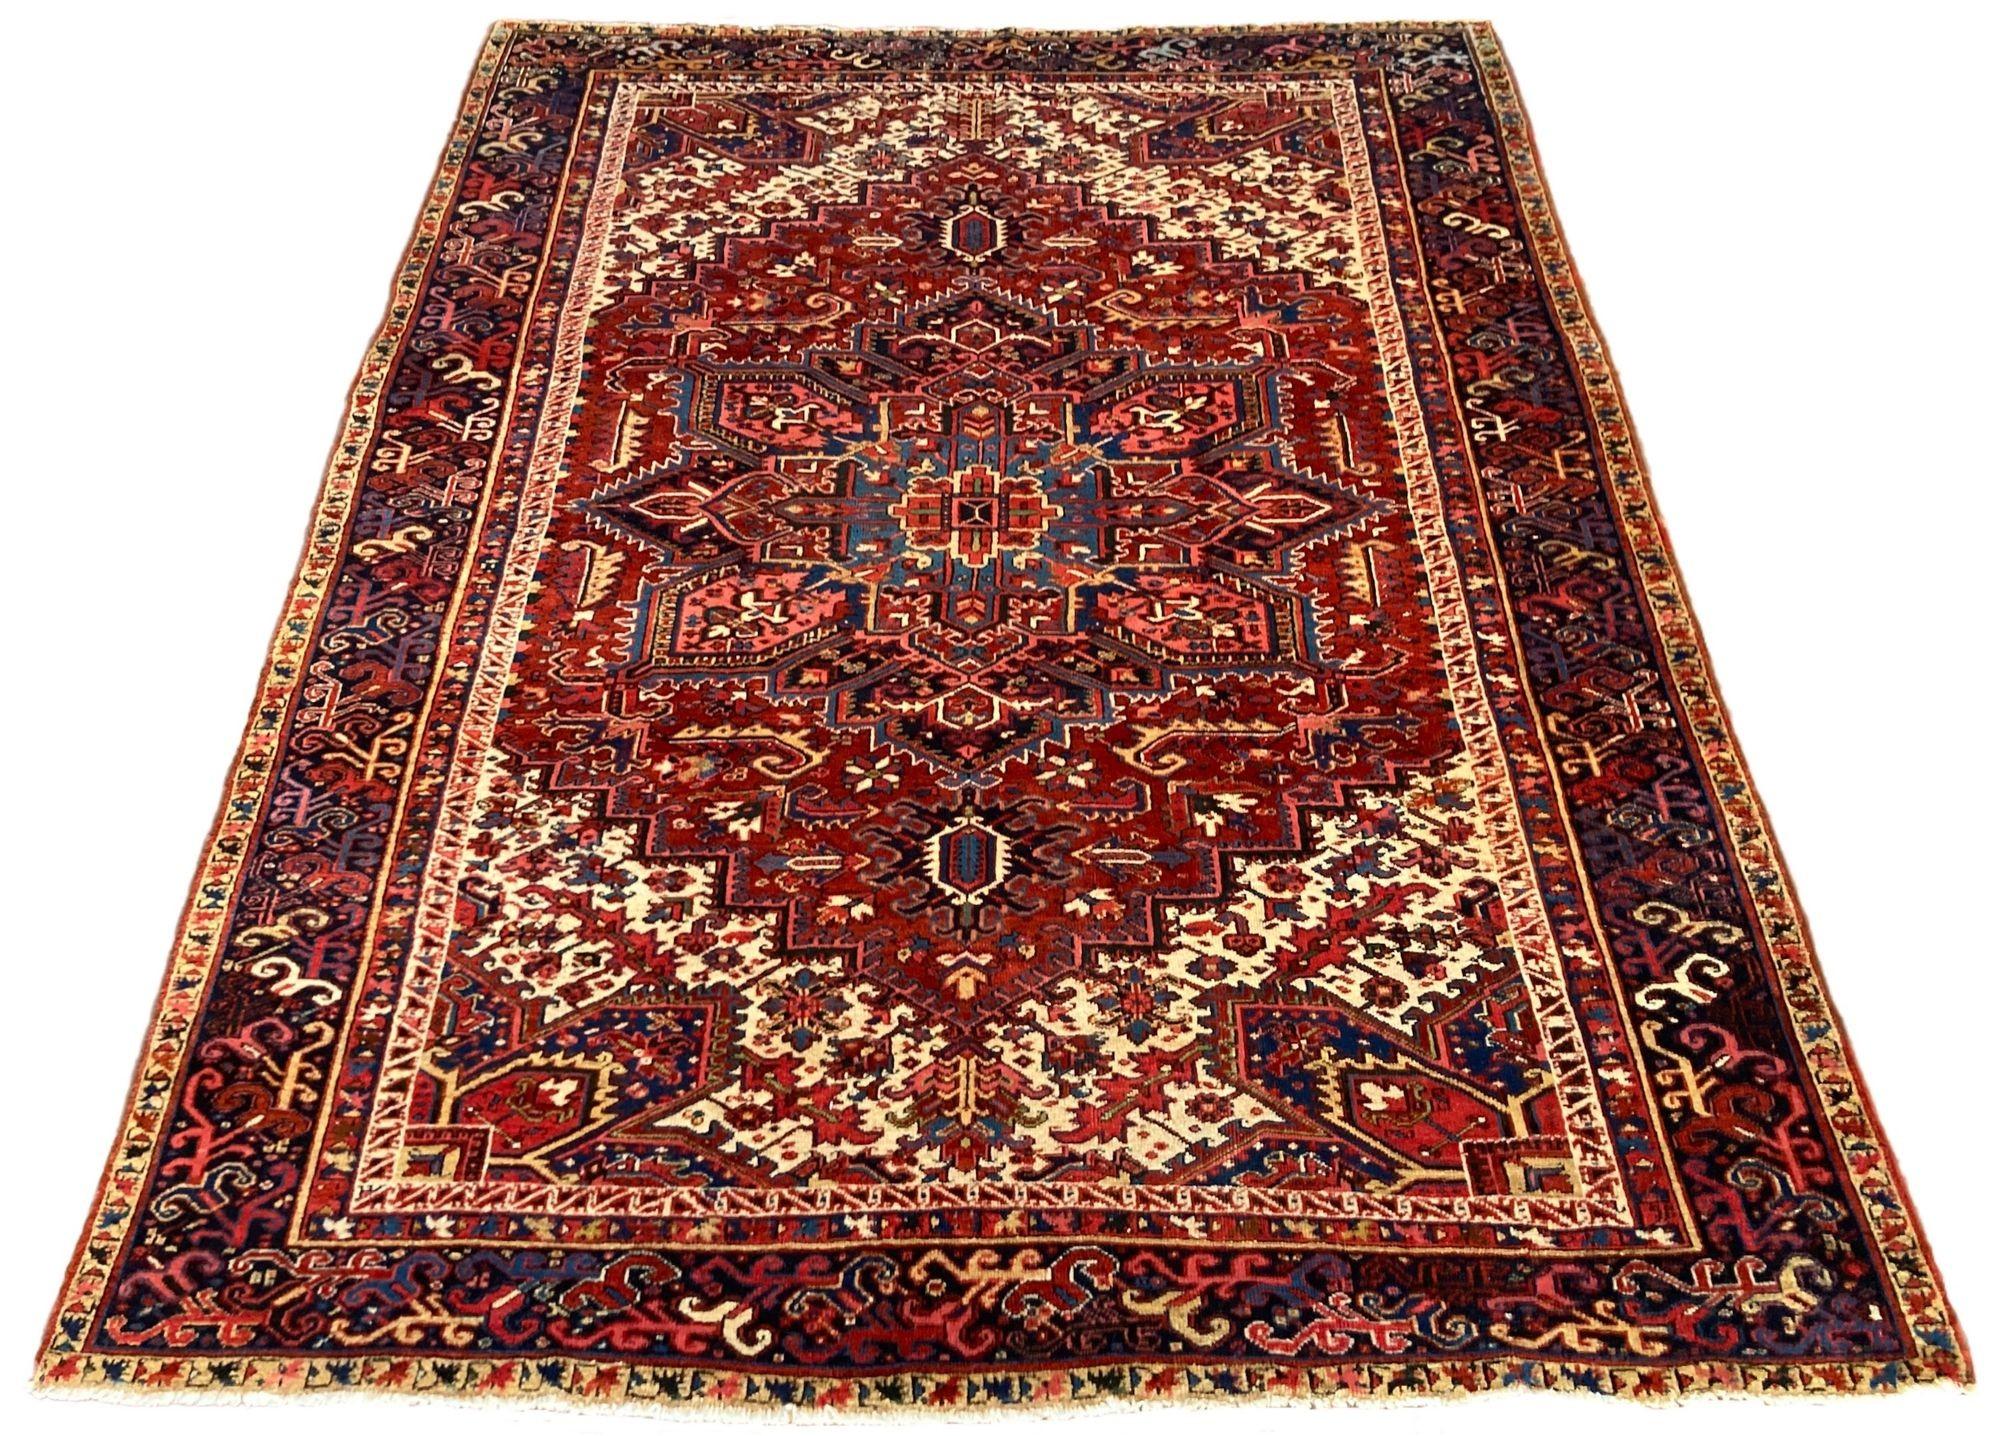 A fabulous antique Heriz carpet, handwoven circa 1910 with a traditional geometrical design on a terracotta field and deep indigo border. Some interesting design elements that include a lovely border design and an inner guard border of